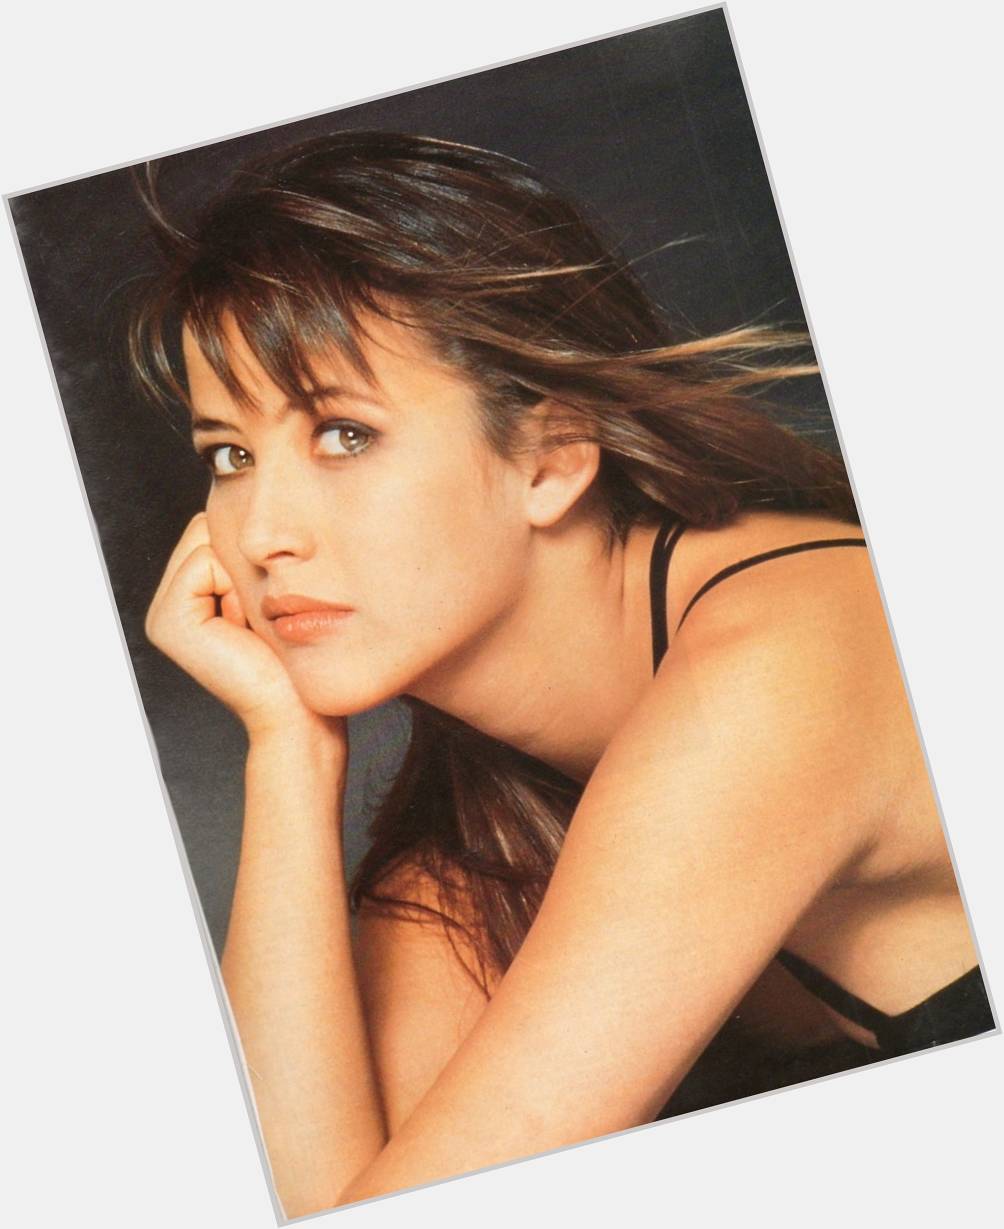 Happy Birthday to the lovely Bond girl Sophie Marceau!! 